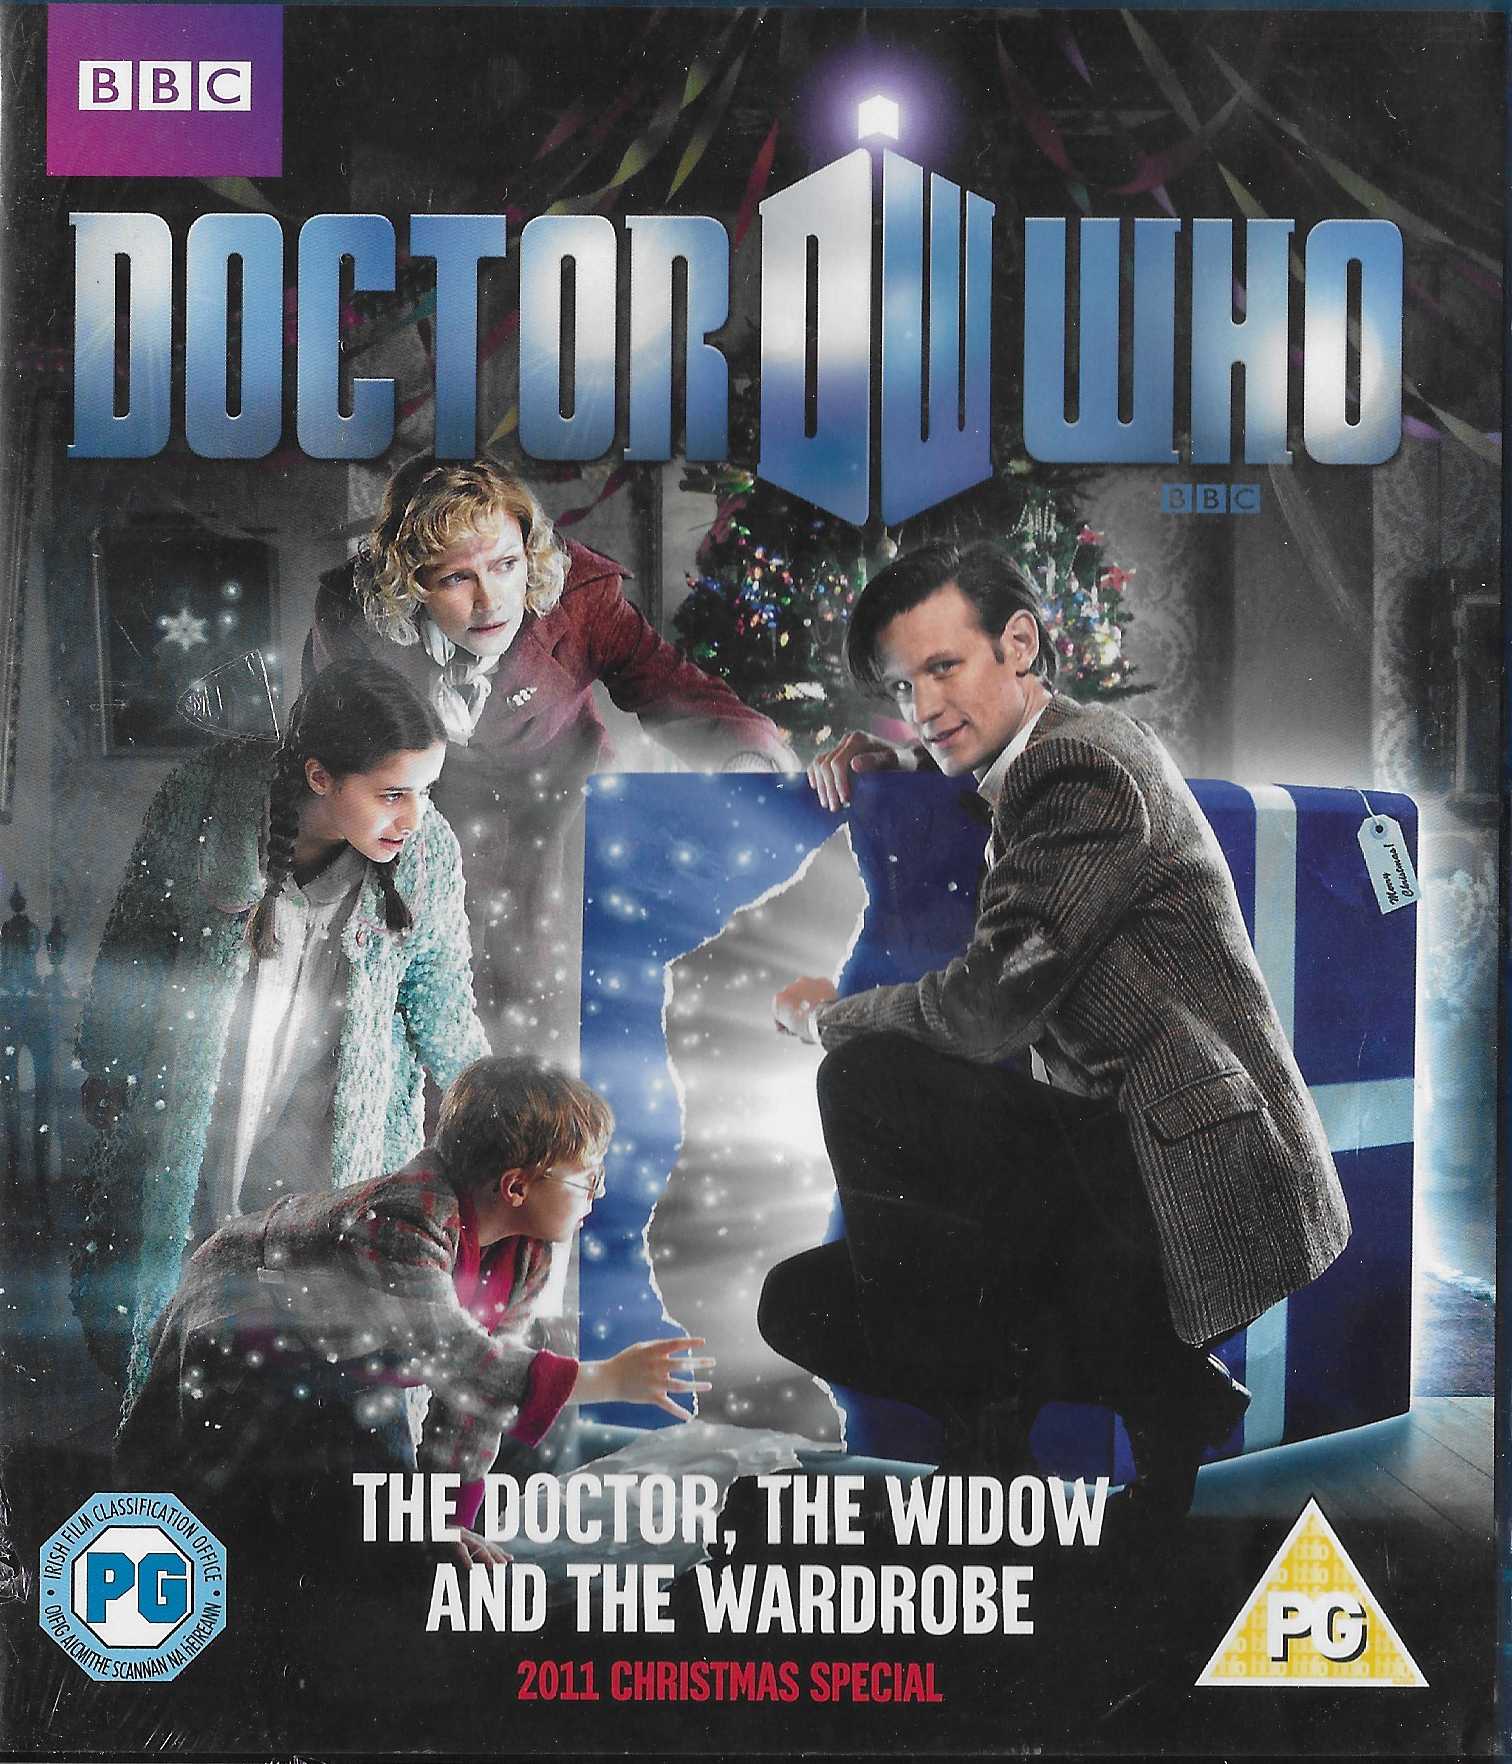 Picture of BBCBD 0171 Doctor Who - The Doctor, the widow and the wardrobe by artist Steven Moffat from the BBC records and Tapes library